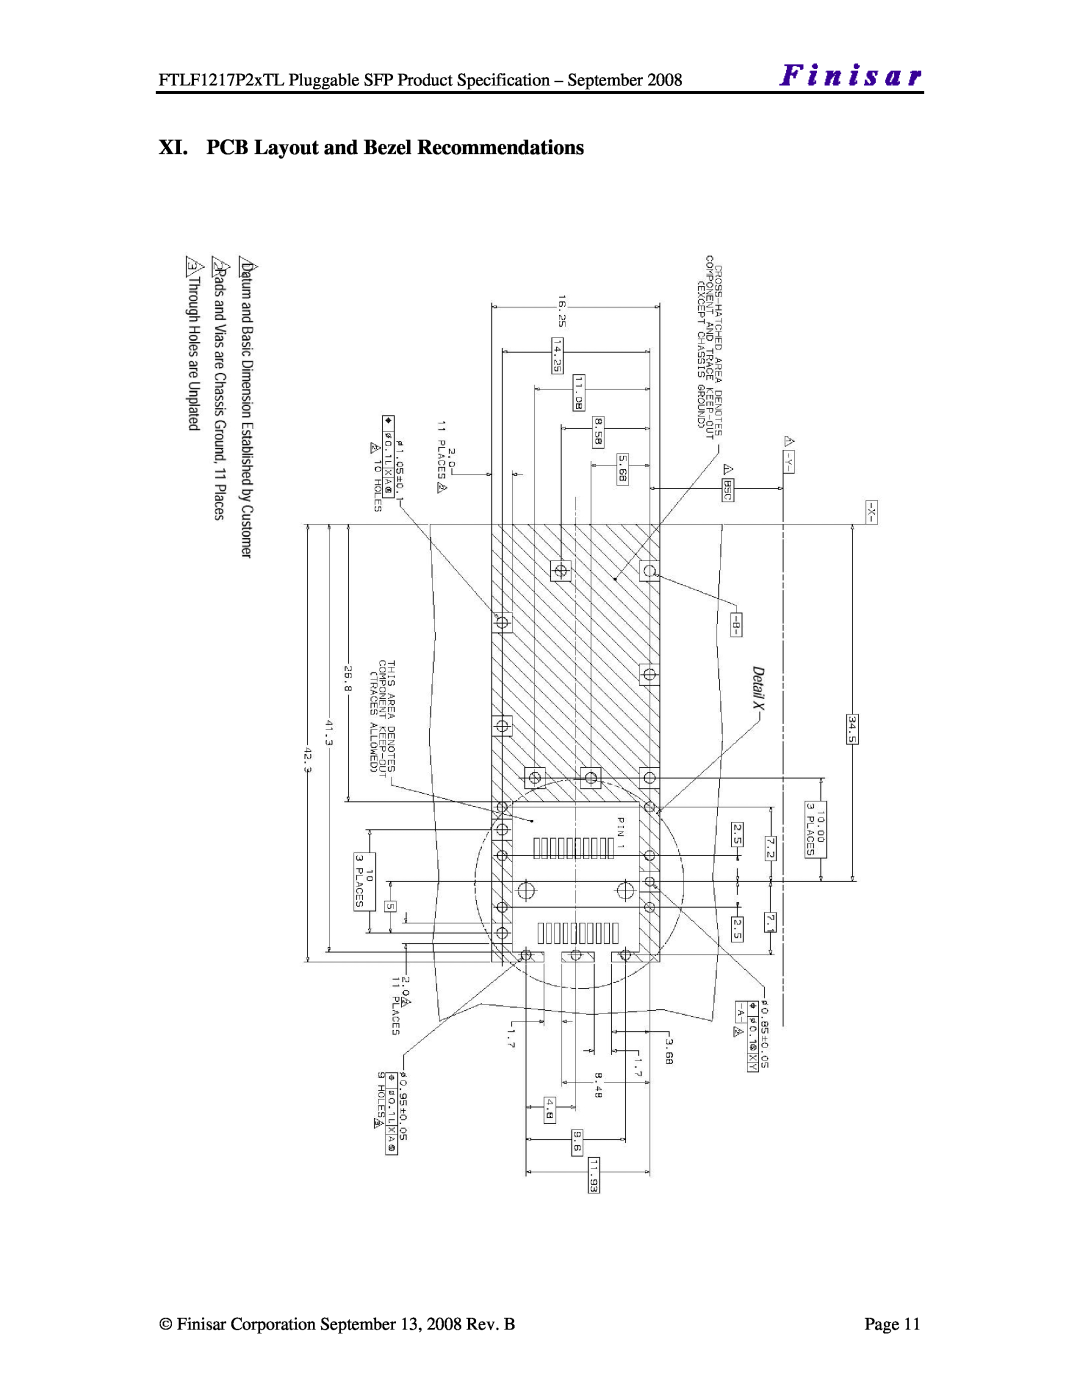 Finisar FTLF1217P2XTL manual XI. PCB Layout and Bezel Recommendations, Finisar Corporation September 13, 2008 Rev. B, Page 